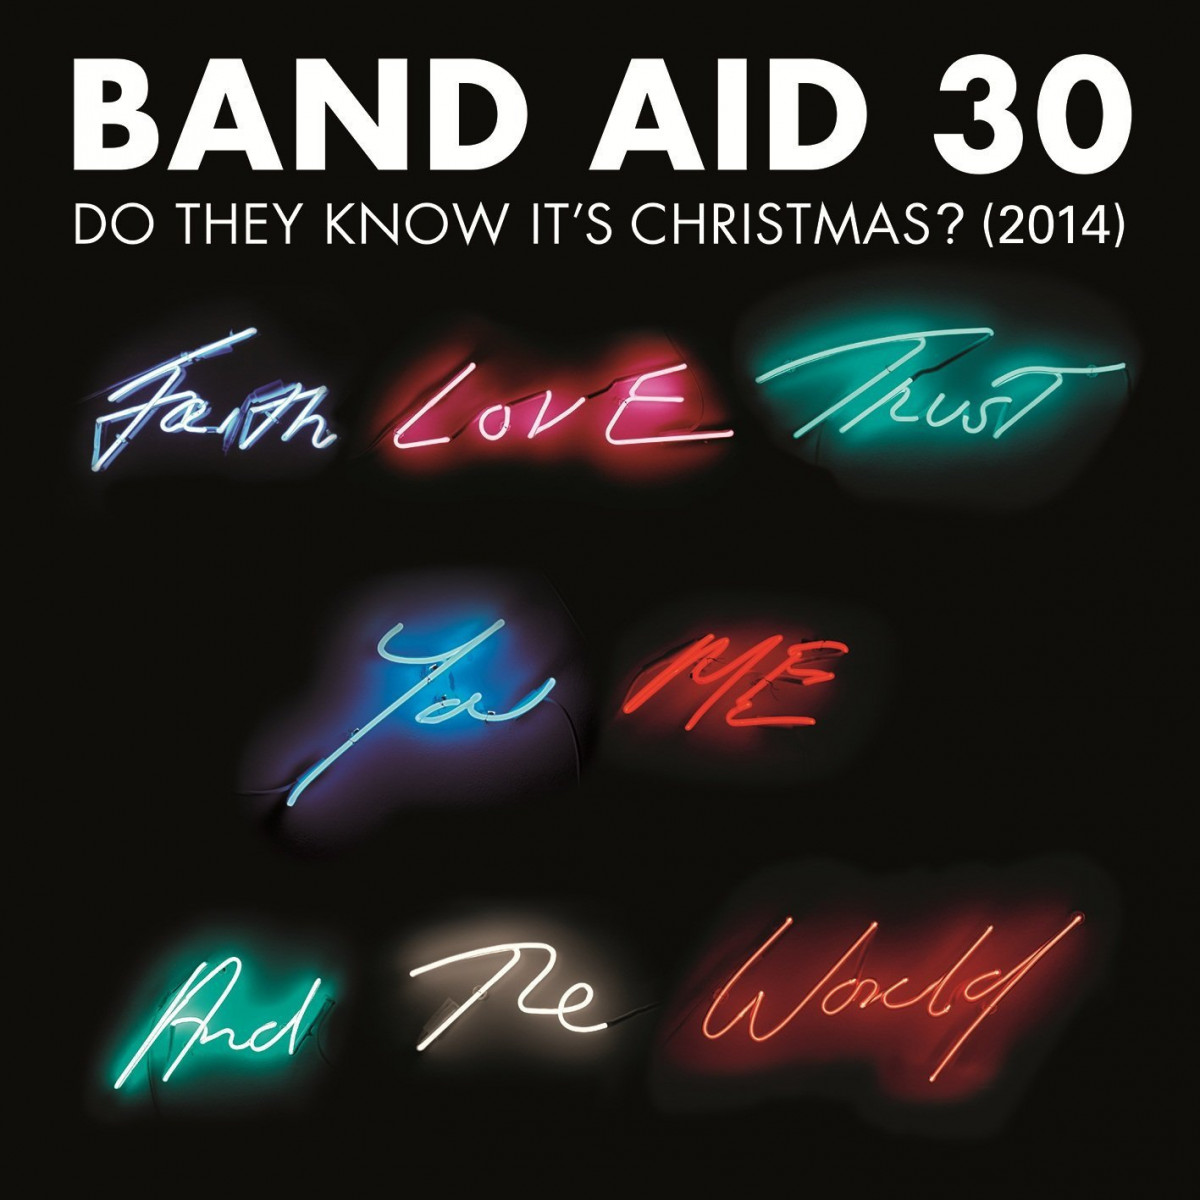 Band Aid 30 - Do they know it's Christmas